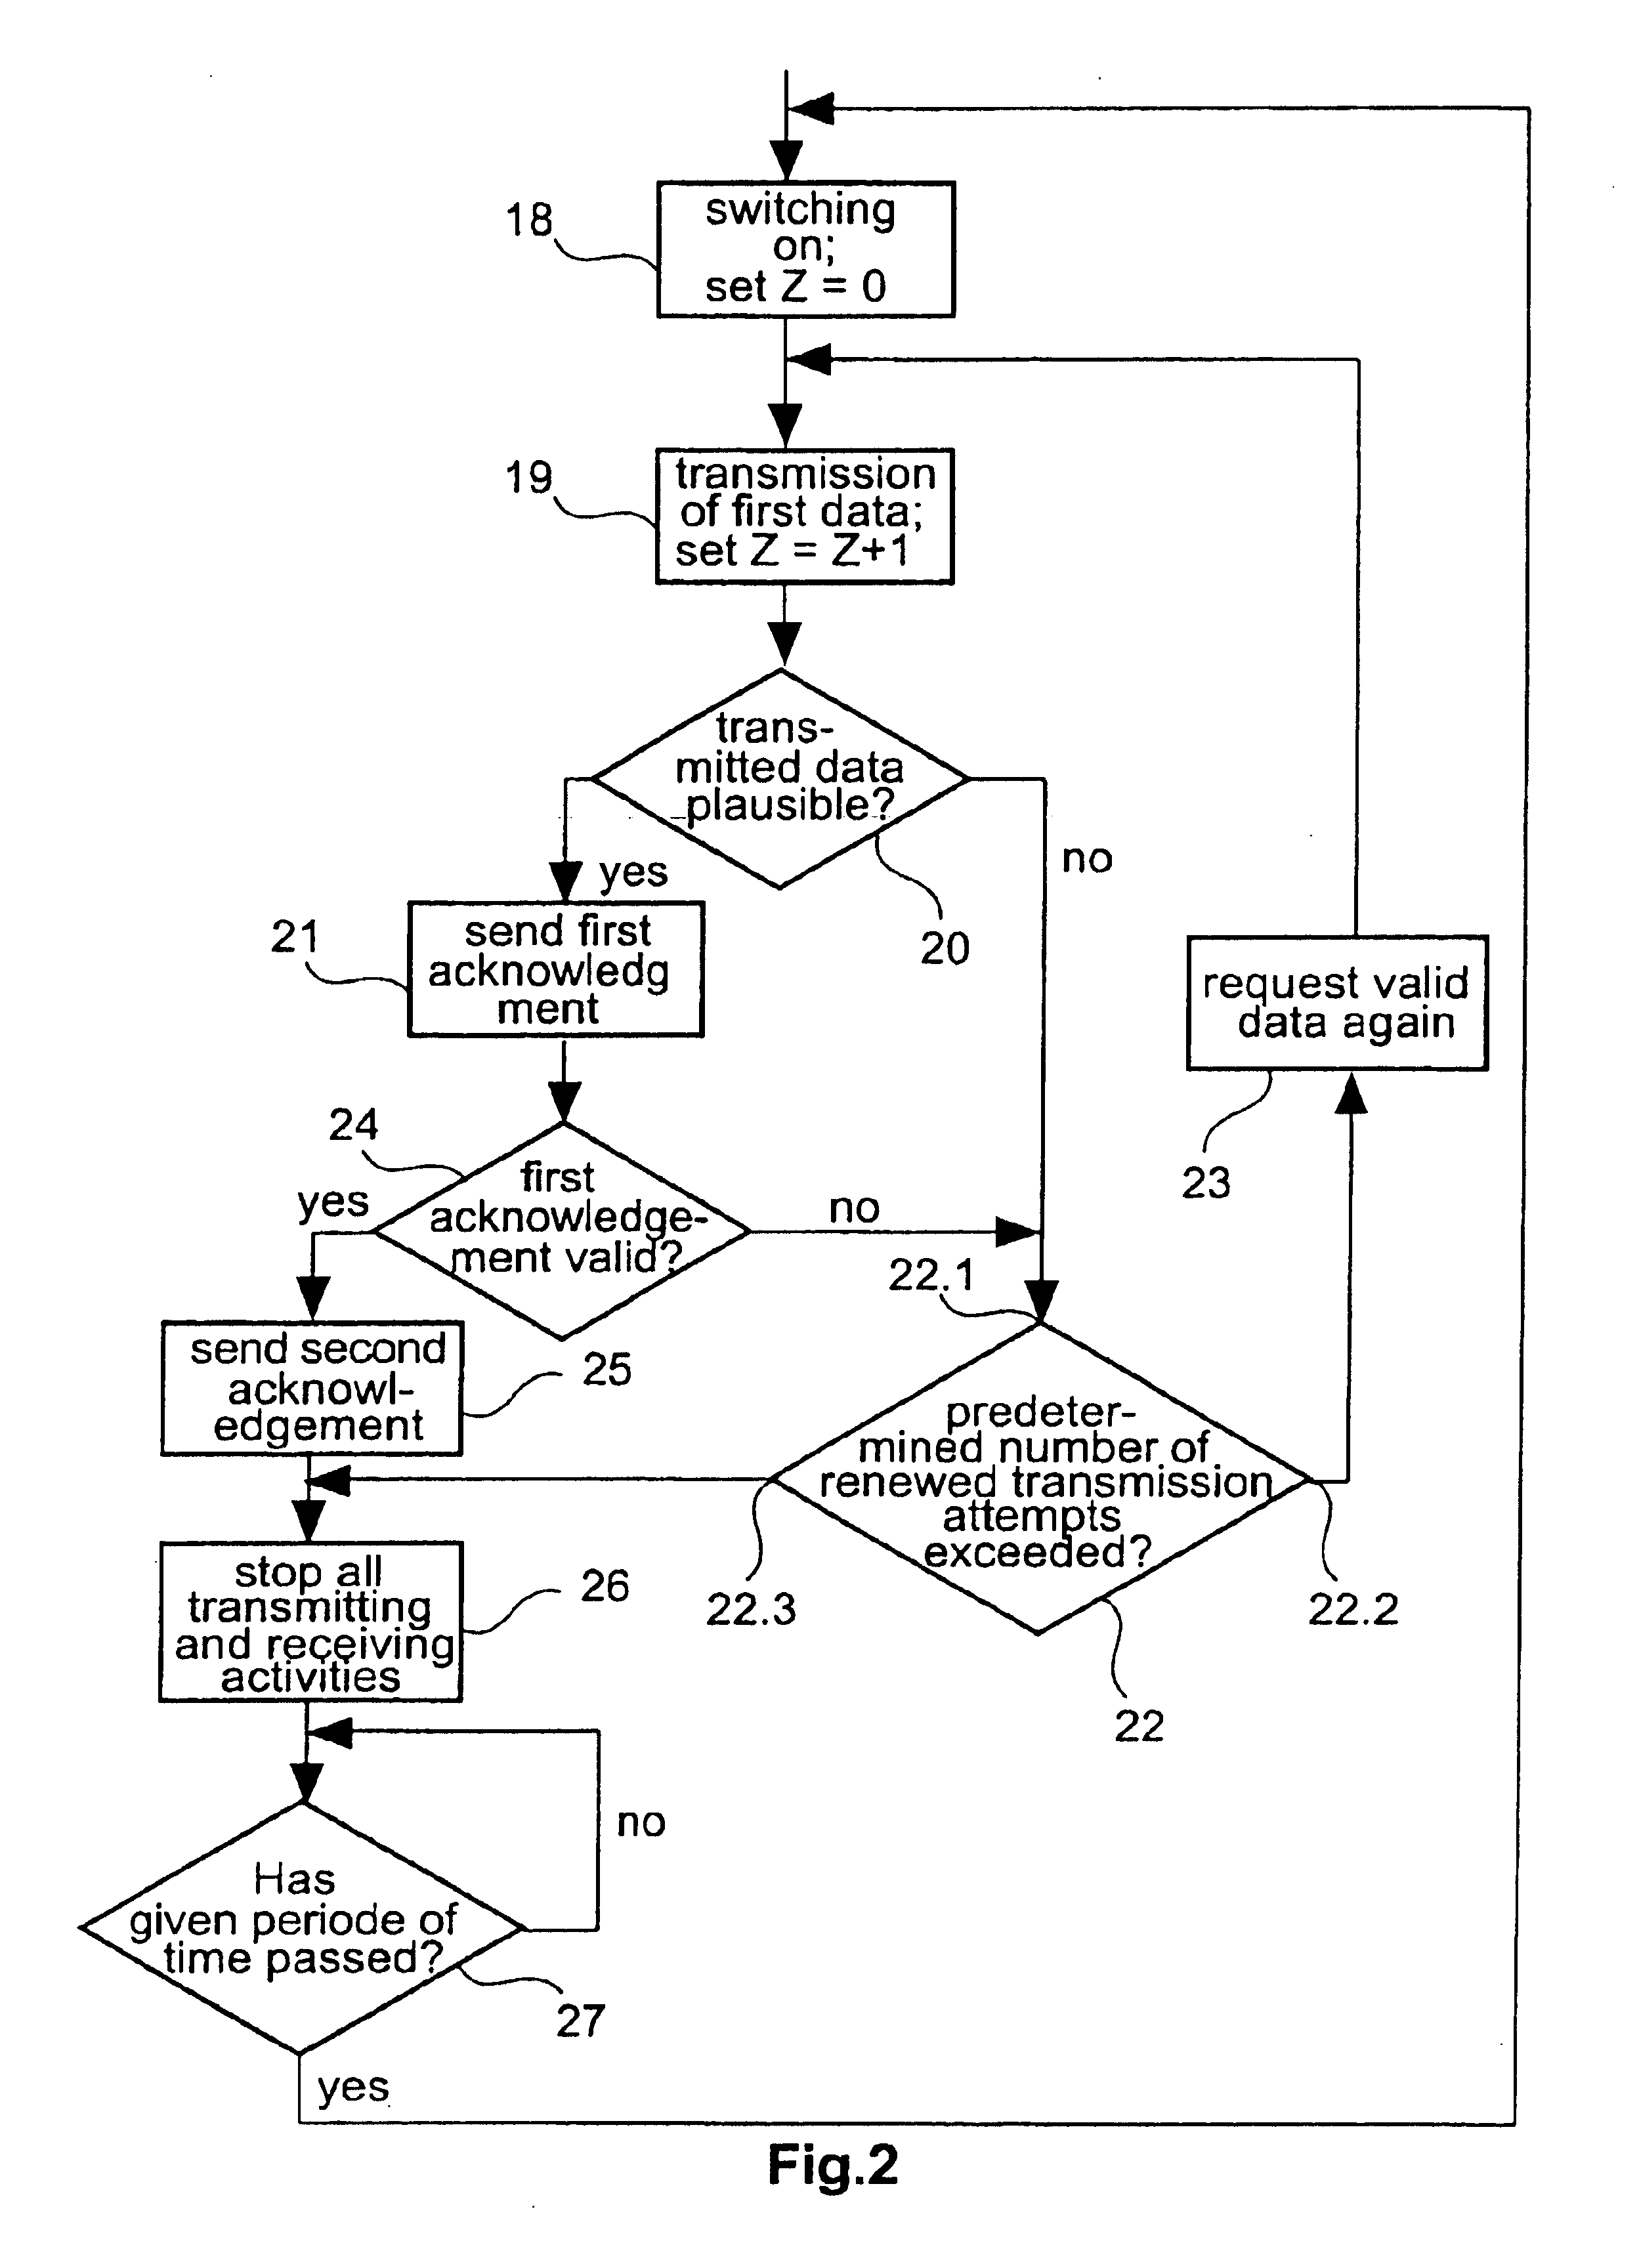 Method and apparatus for data transmission between an electromedical implant and an external apparatus